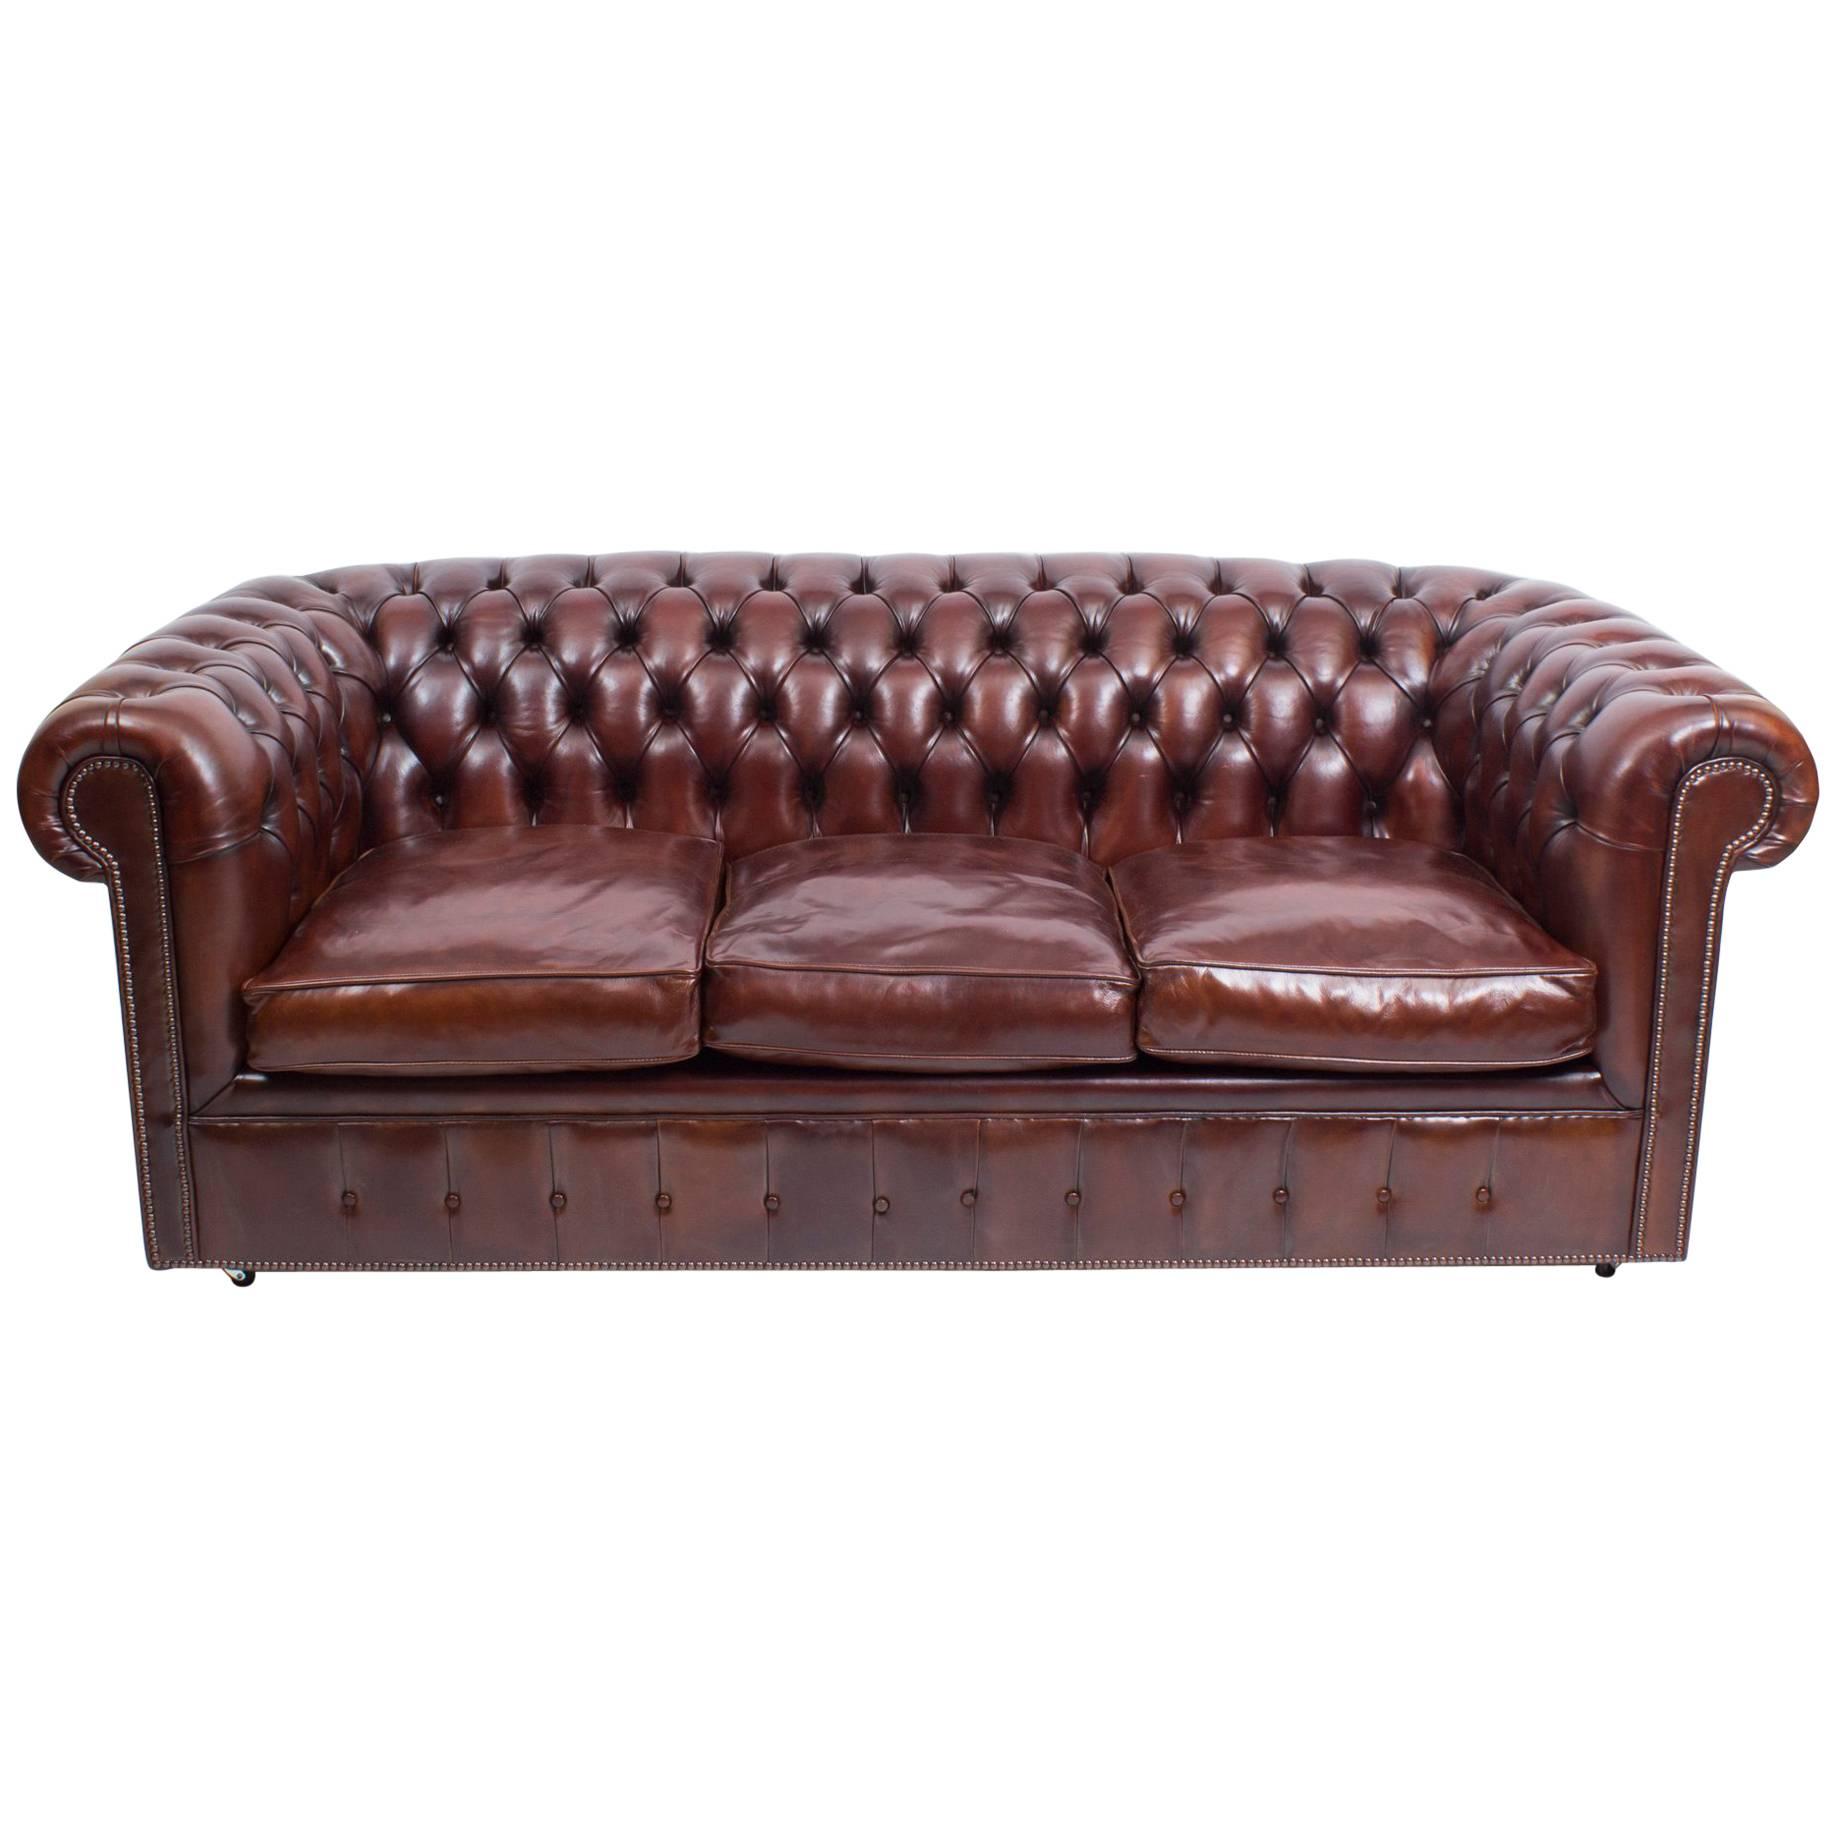 Bespoke English Leather Chesterfield Sofa Bed BBO For Sale